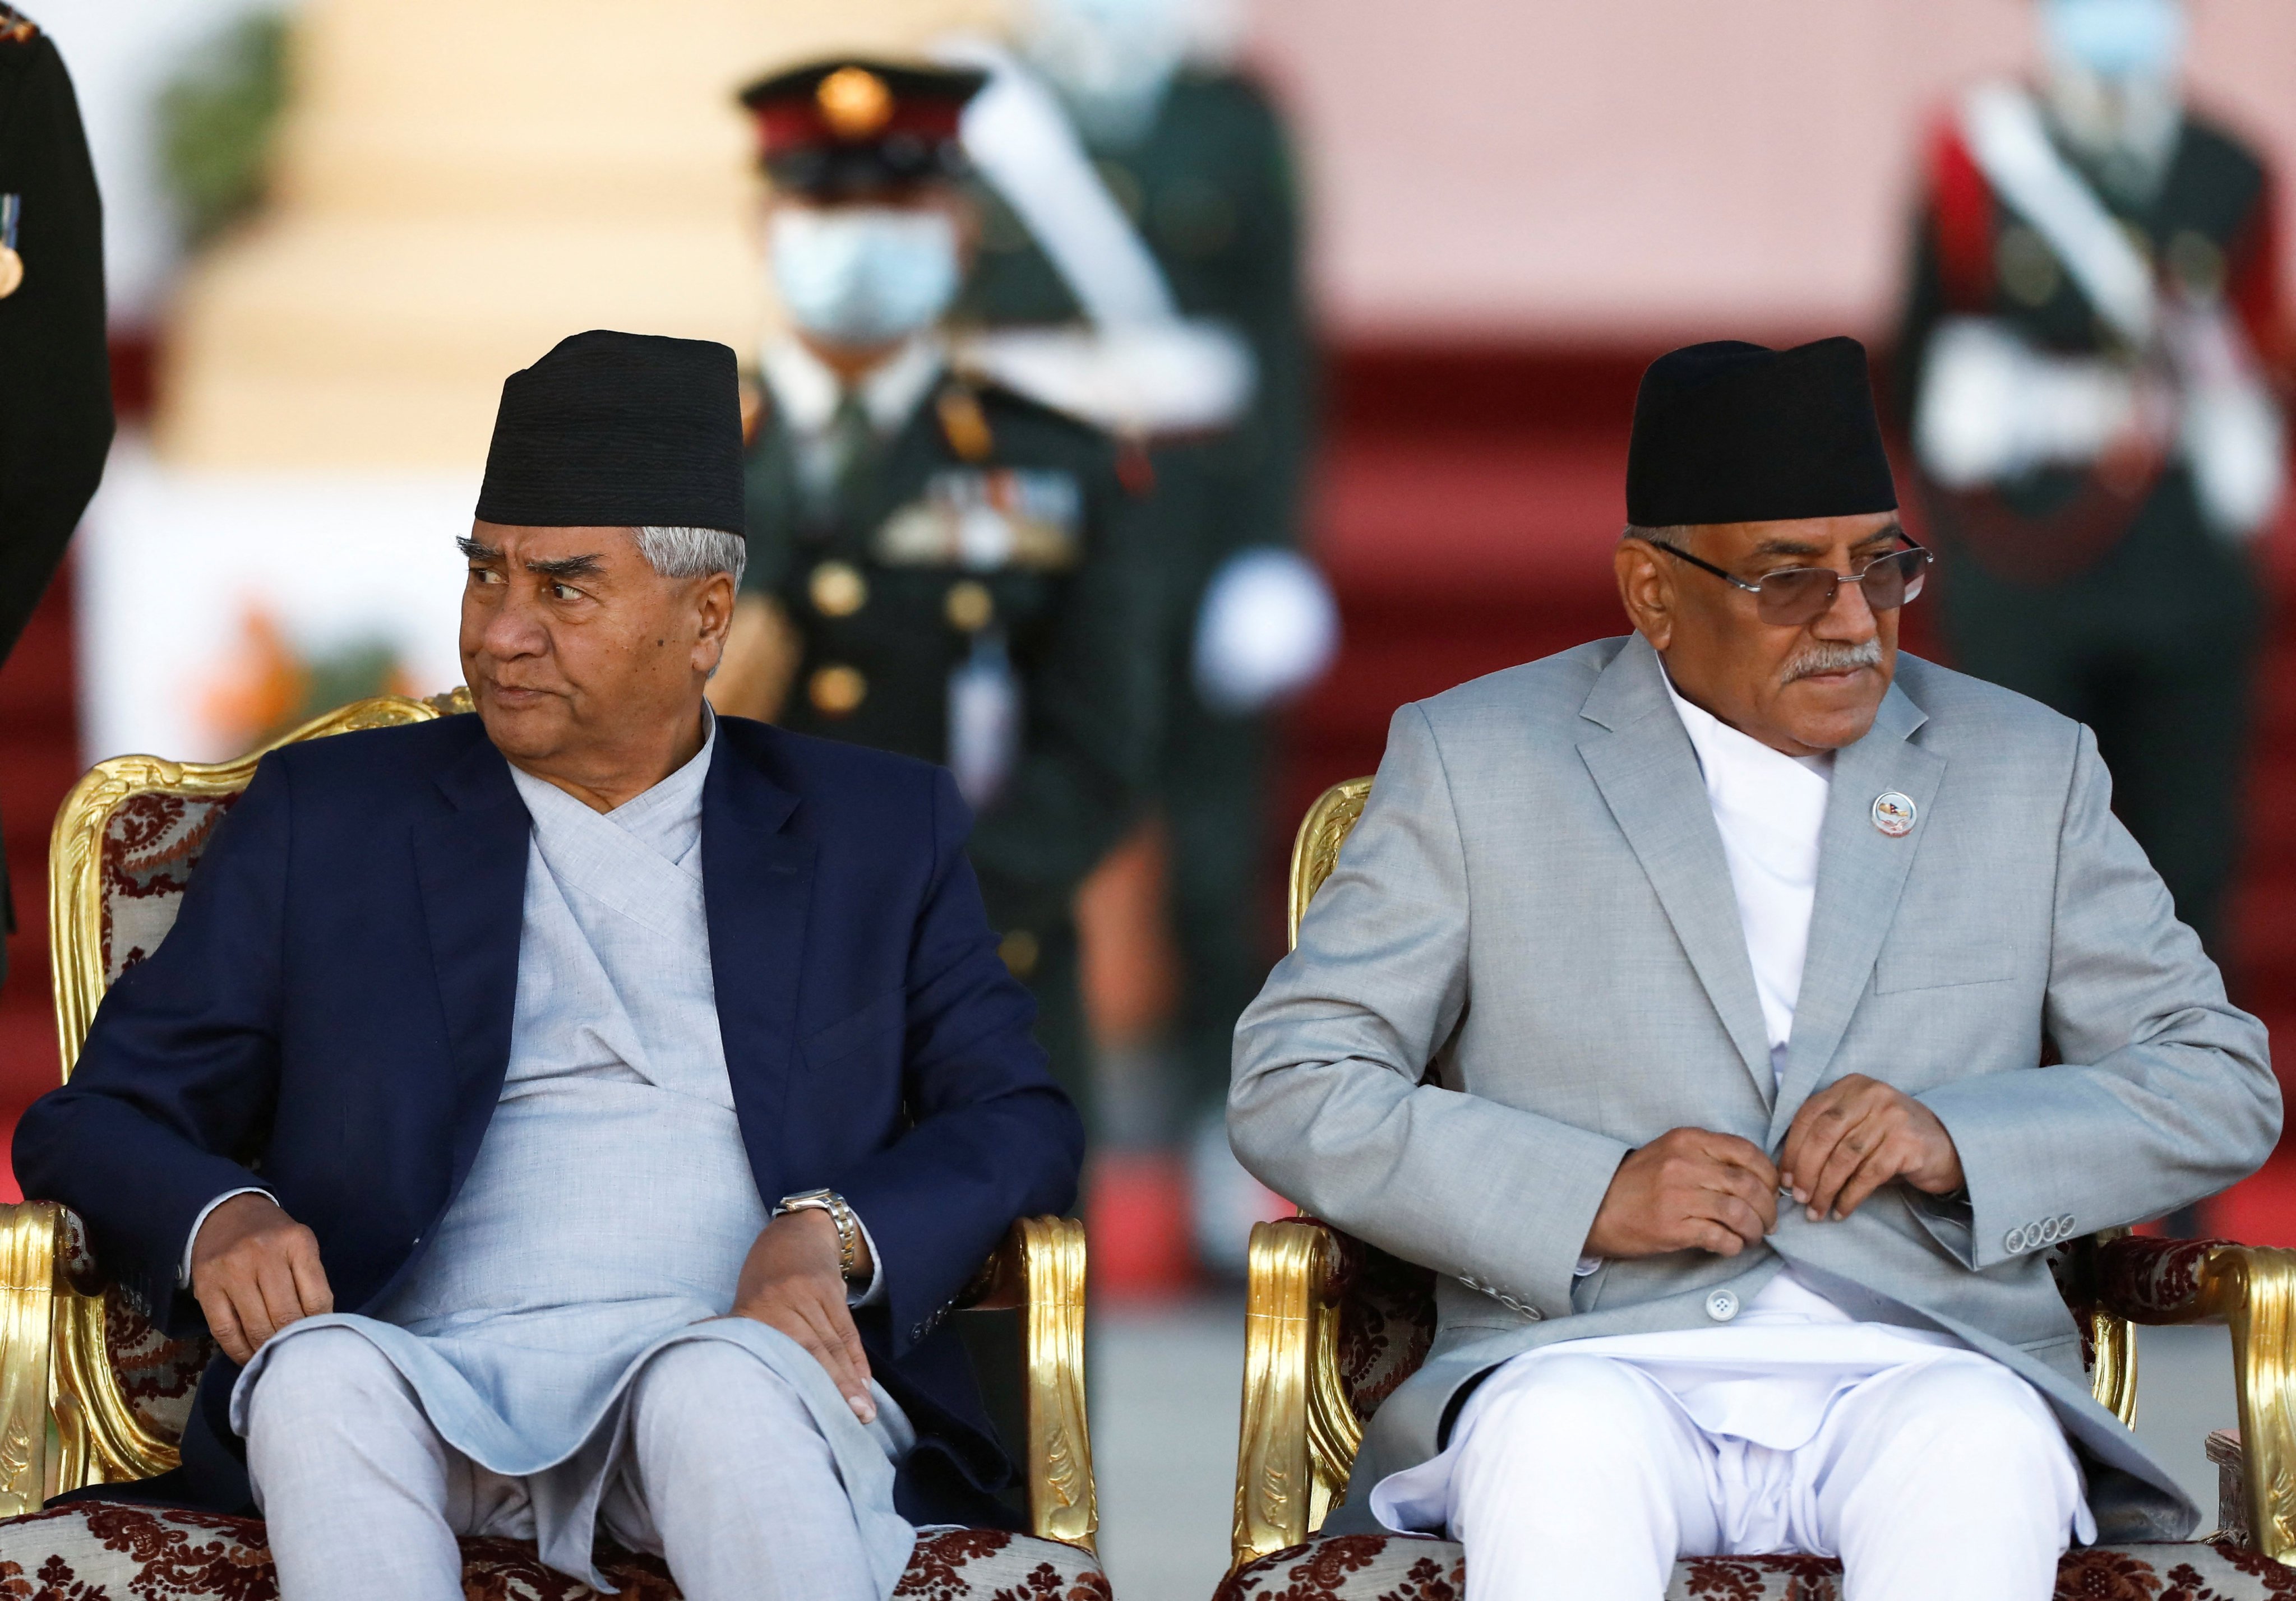 Nepal’s Prime Minister Pushpa Kamal Dahal (right), has formed an alliance with with form PM Sher Bahadur Deuba. Photo: Reuters